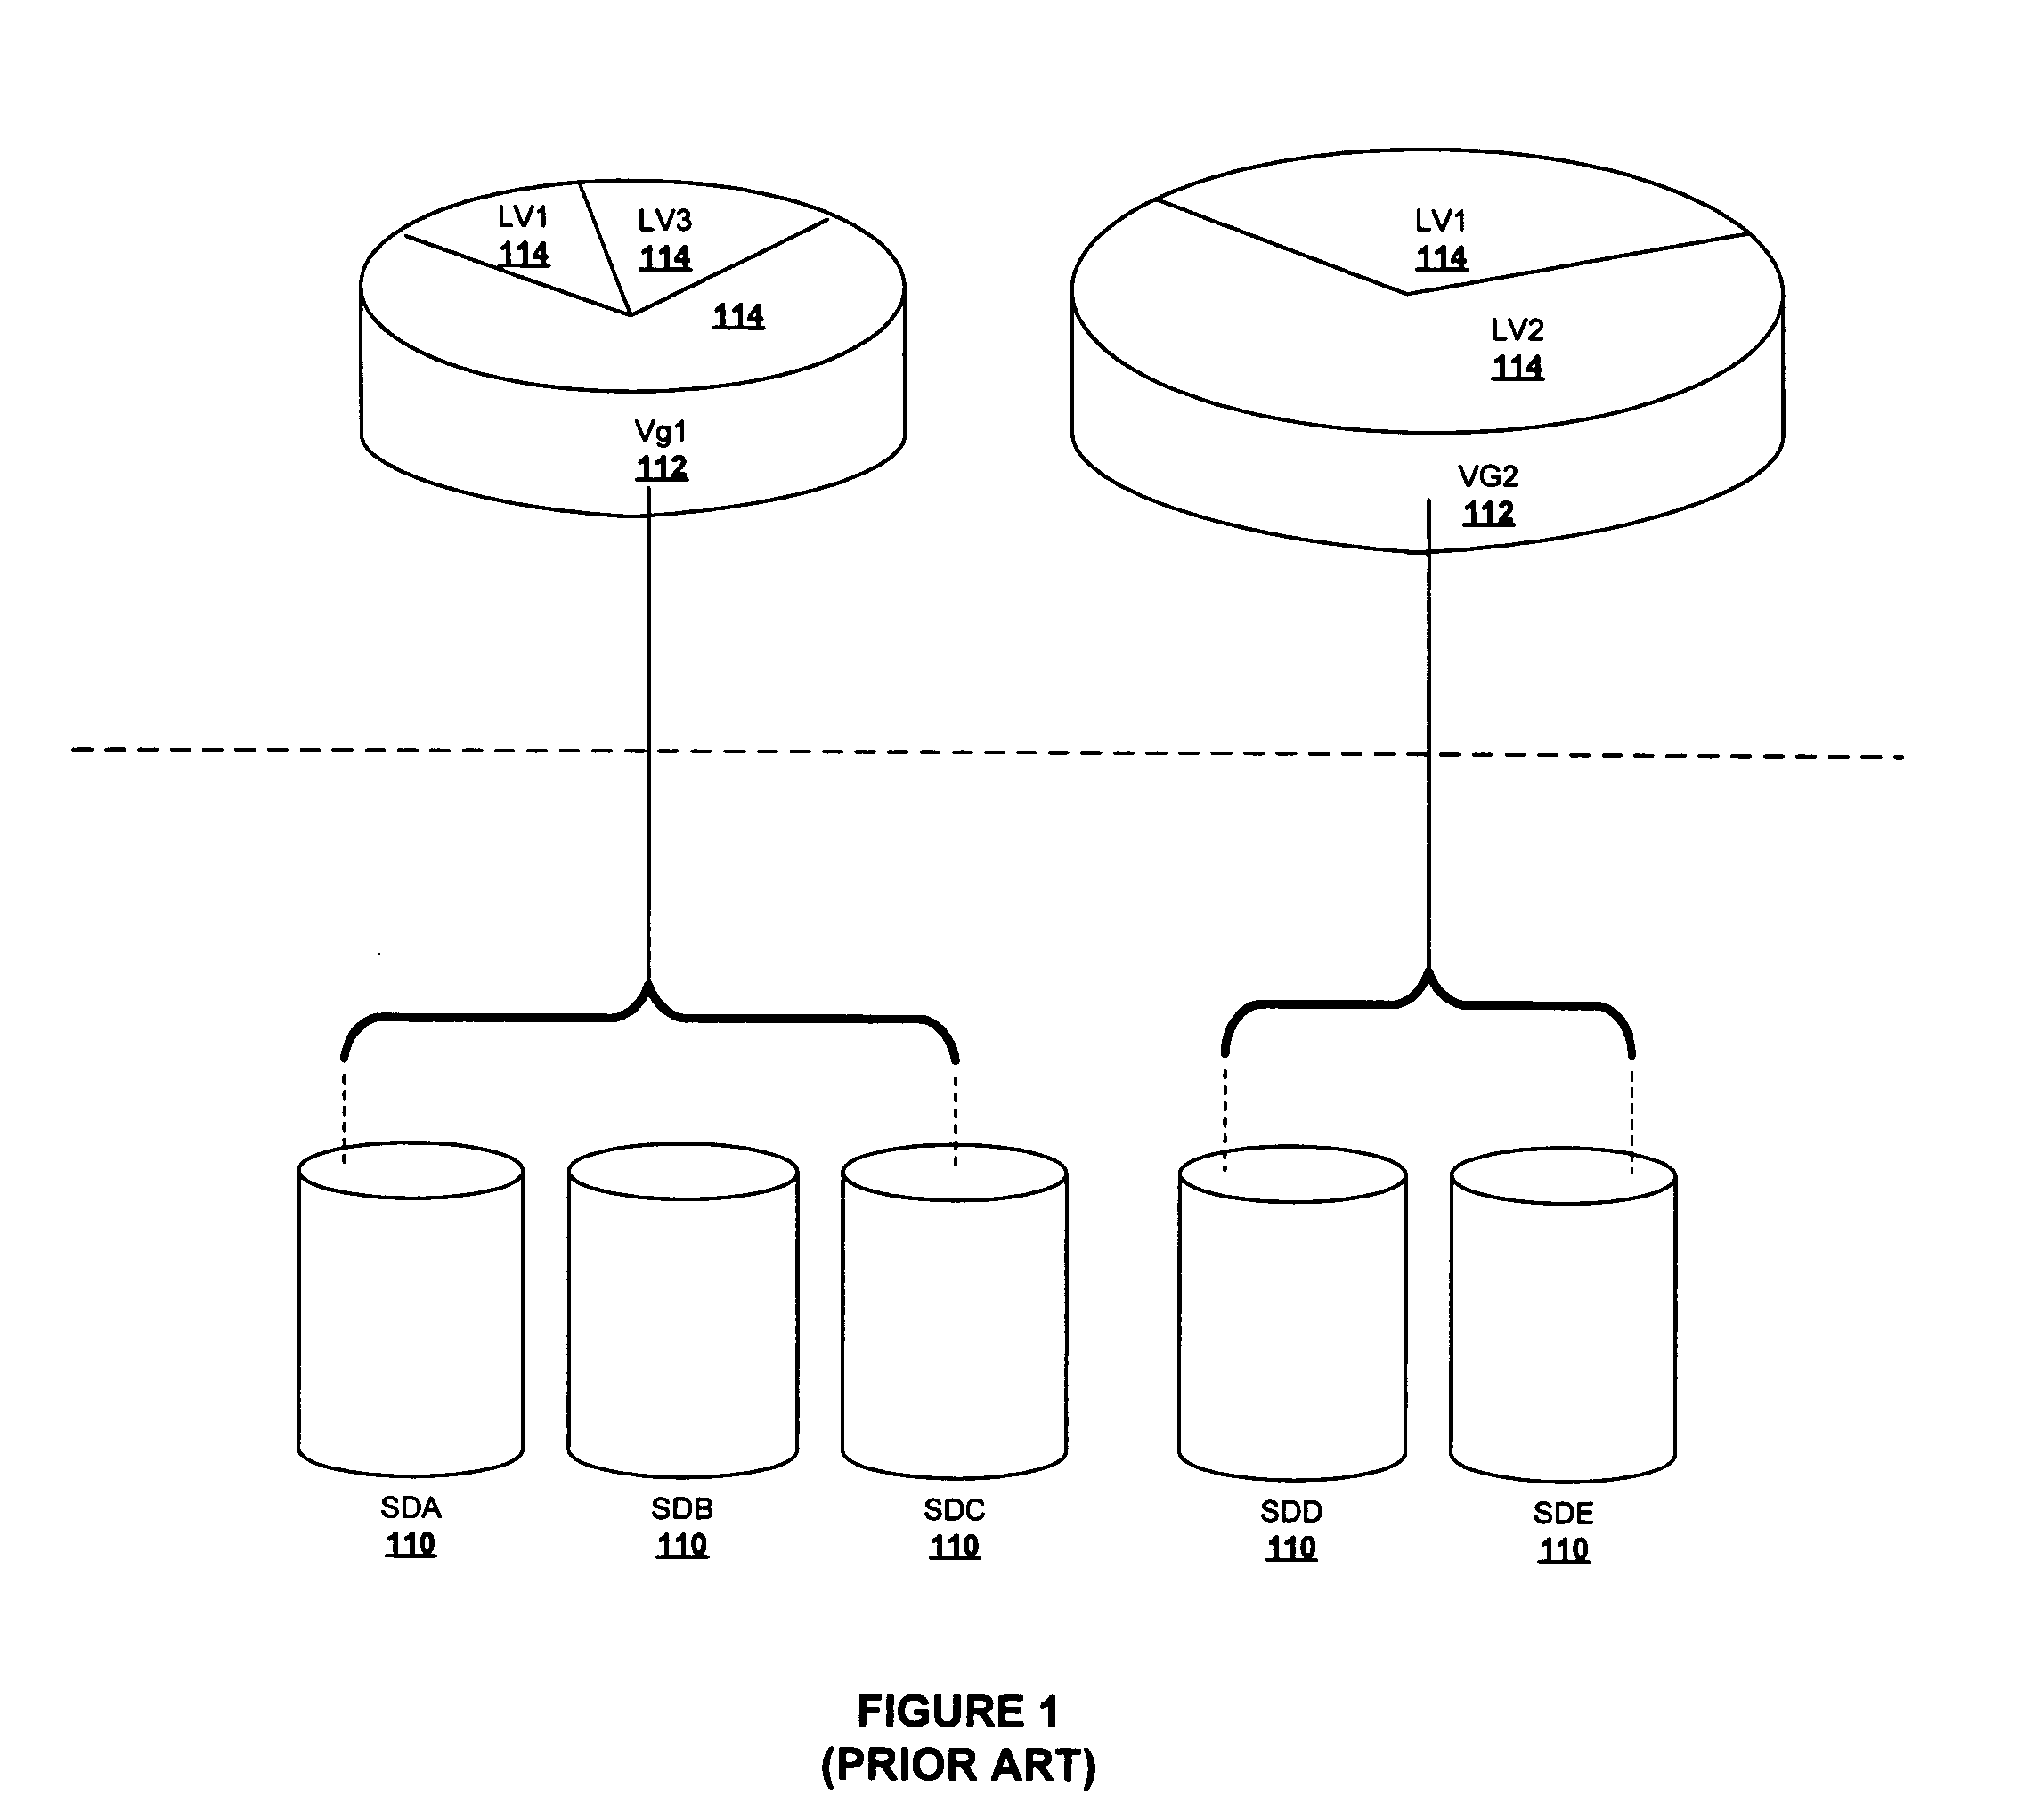 Method for fast recovery of I/O failure on a file system